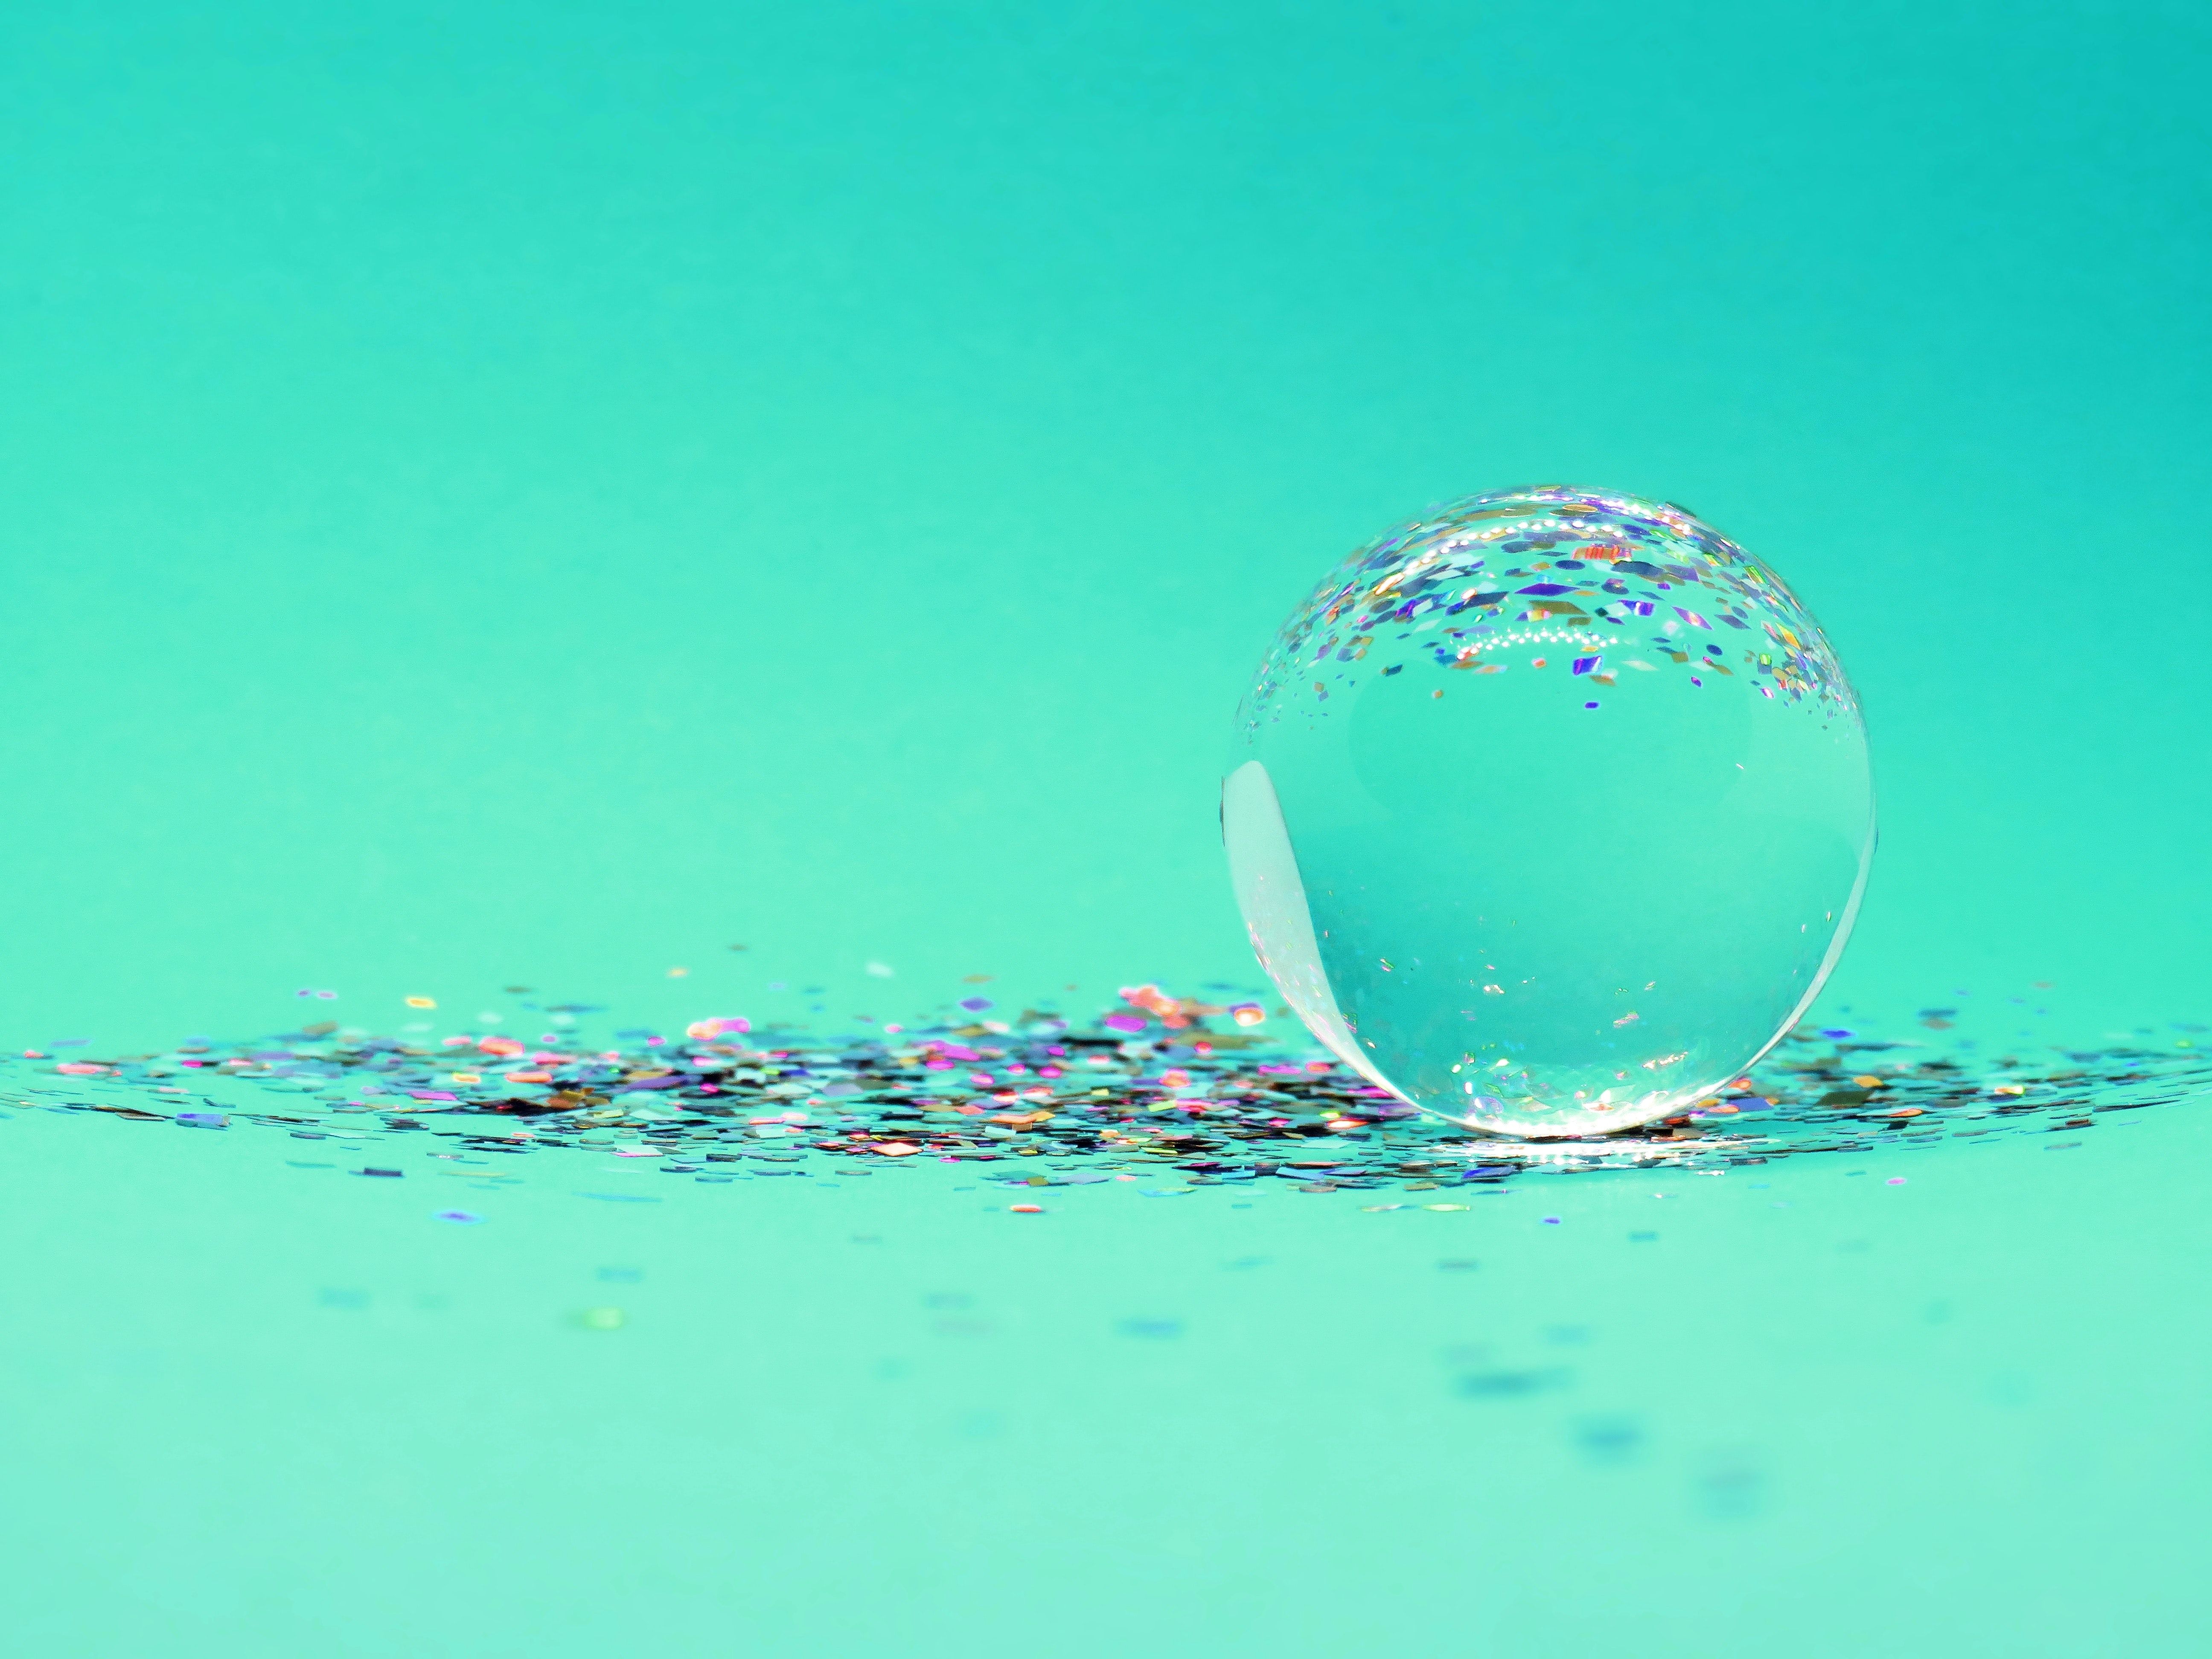 A glass sphere on a blue background with confetti - Bubbles